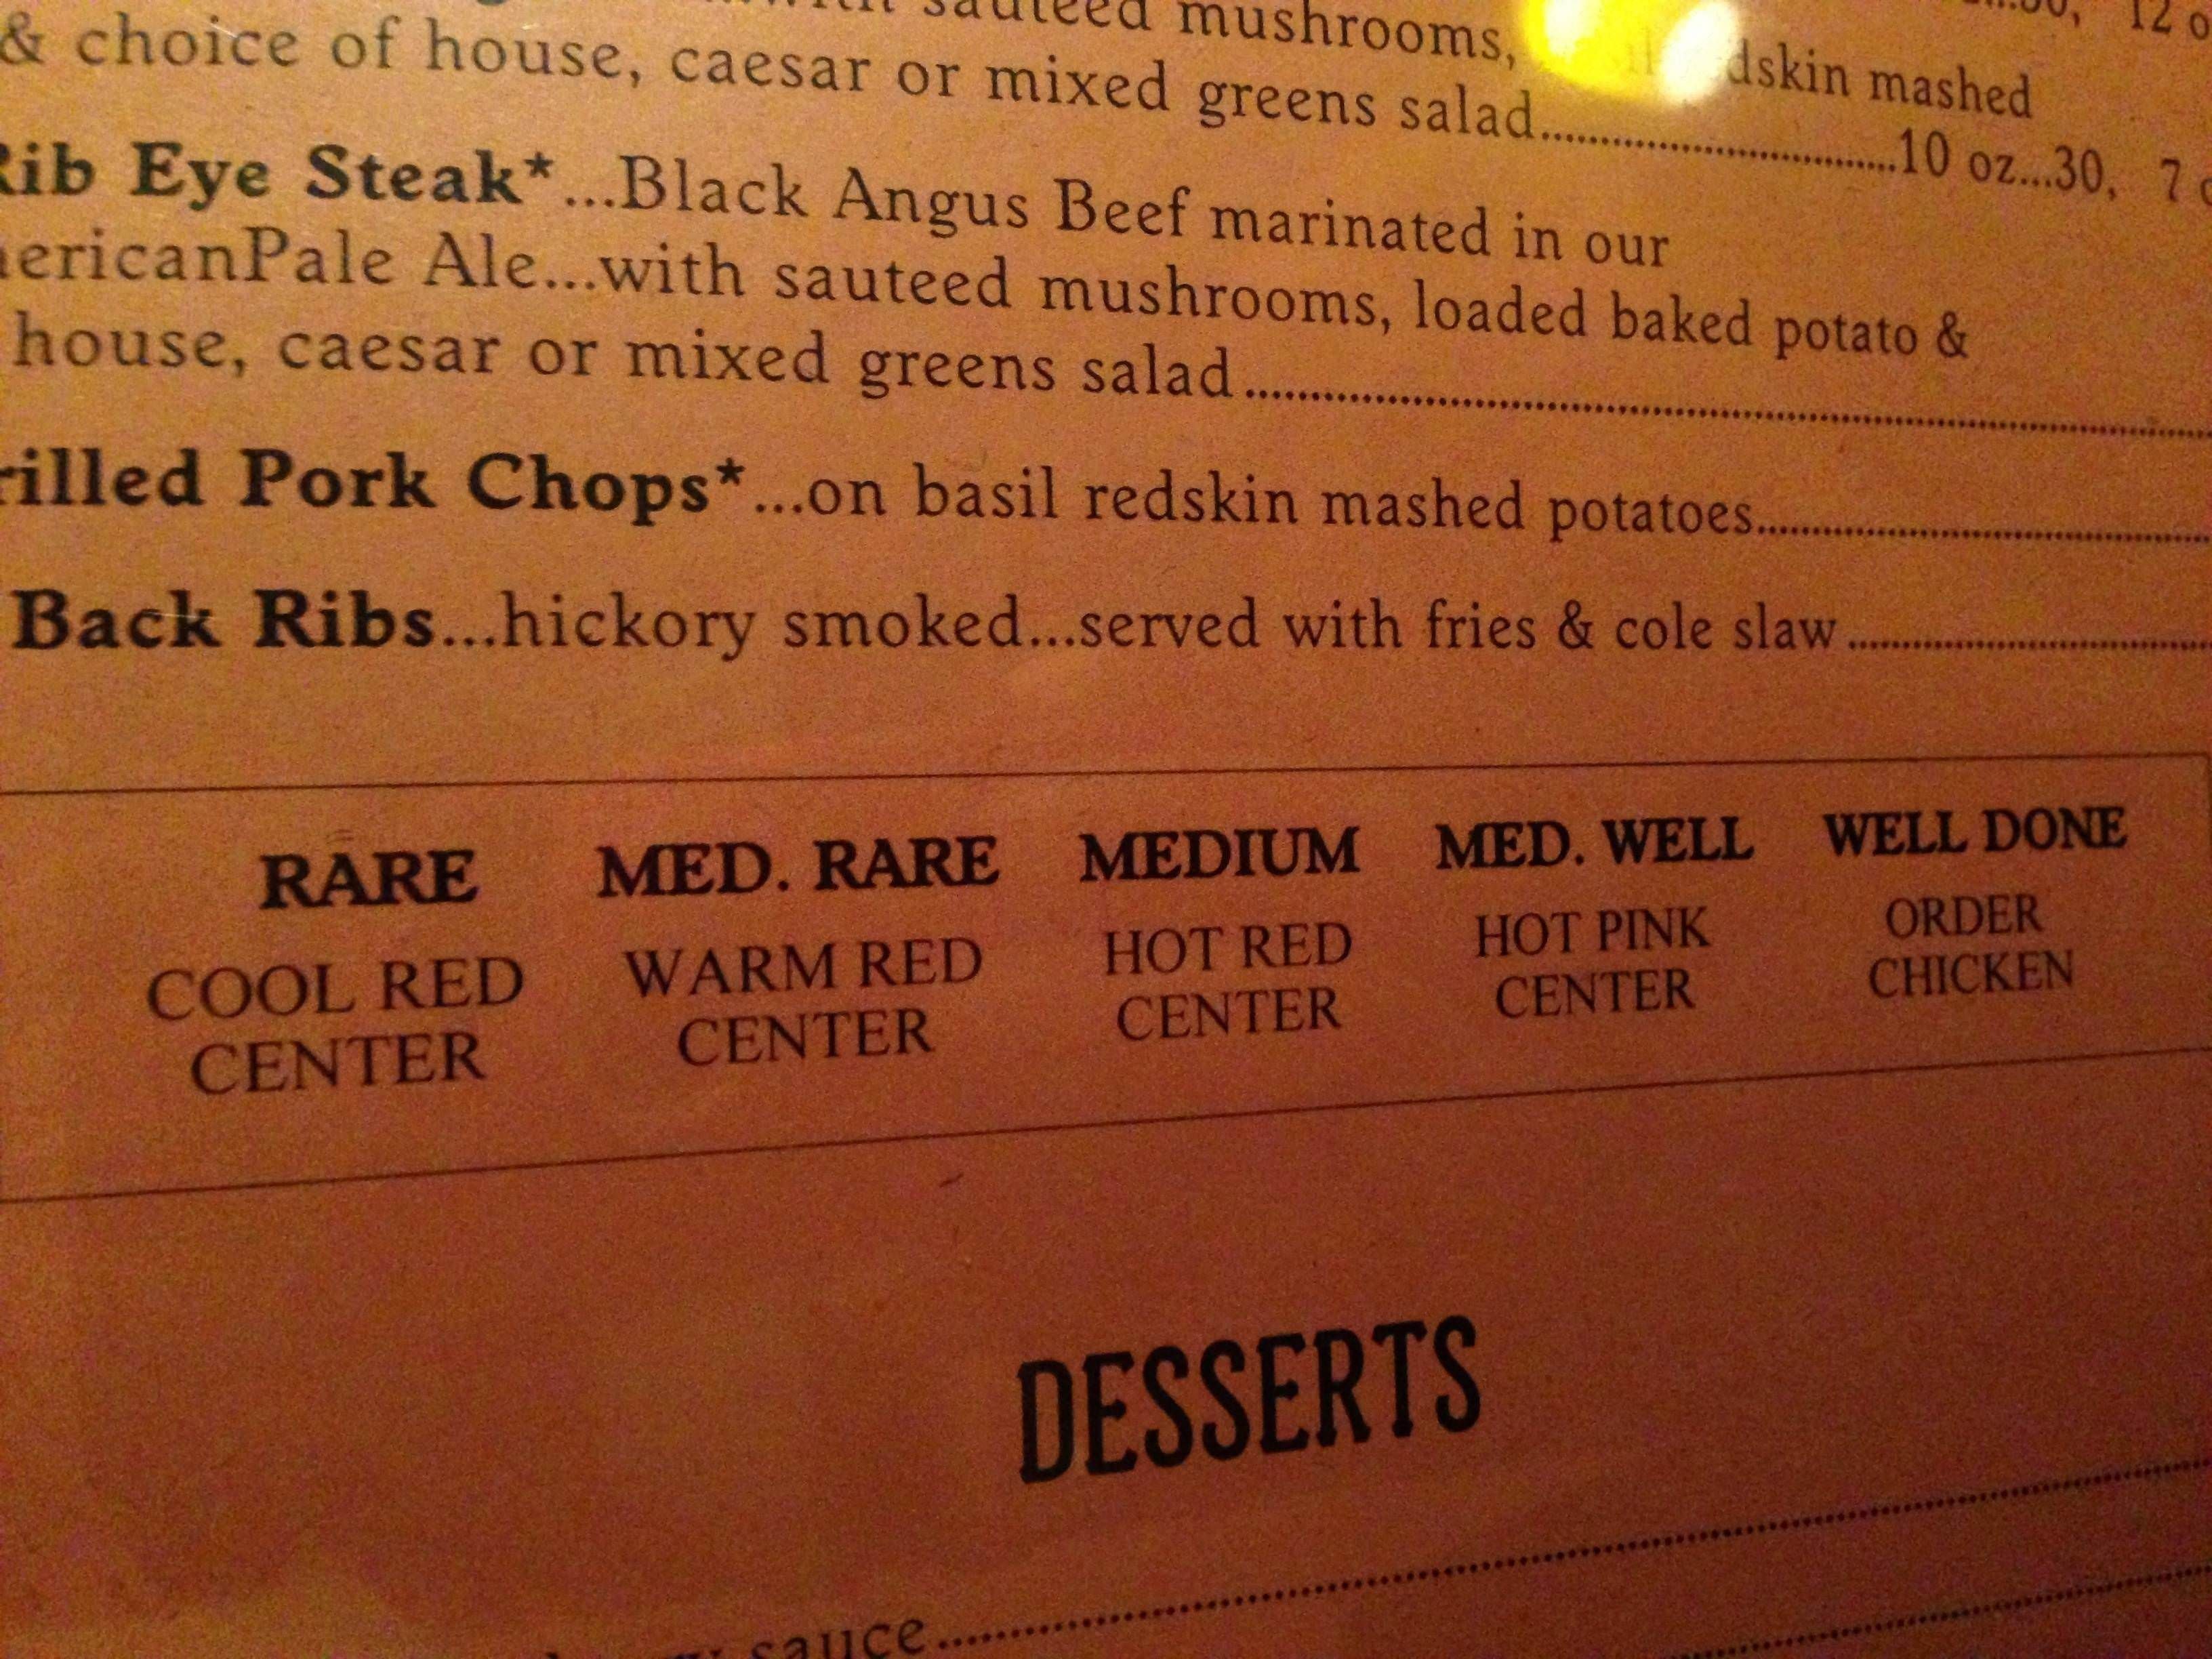 My kind of steakhouse!